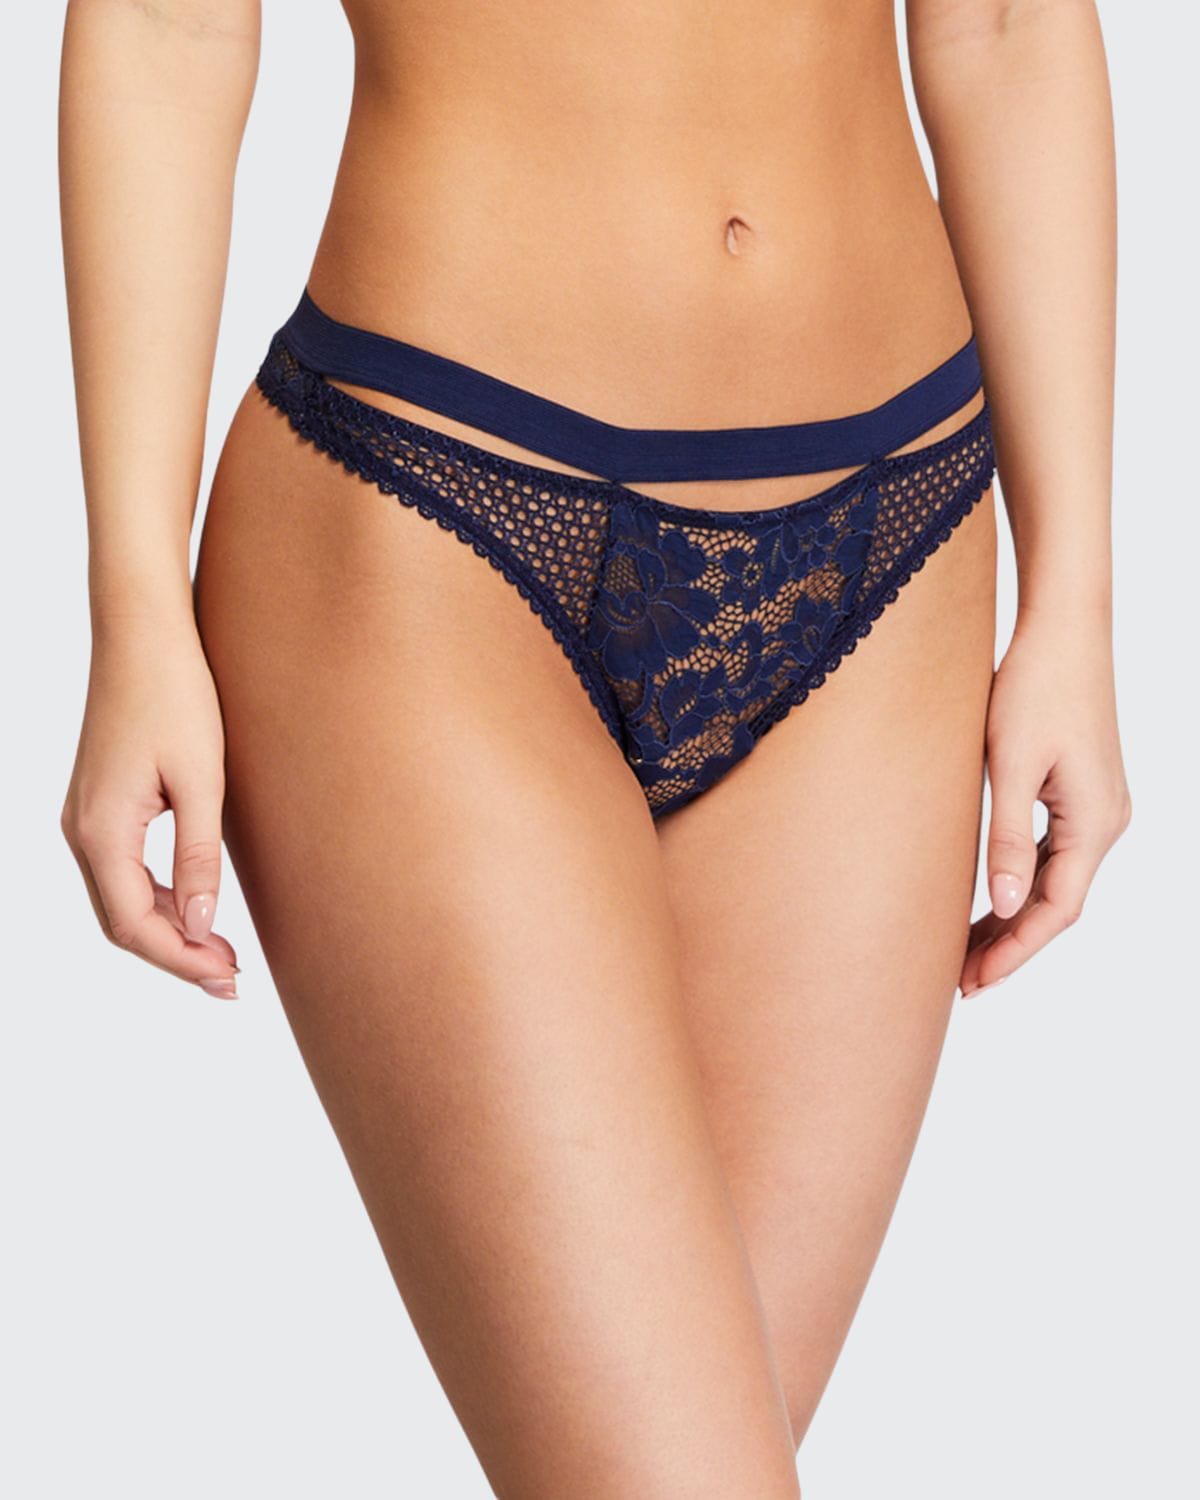 Else Petunia Sporty Lace Thong